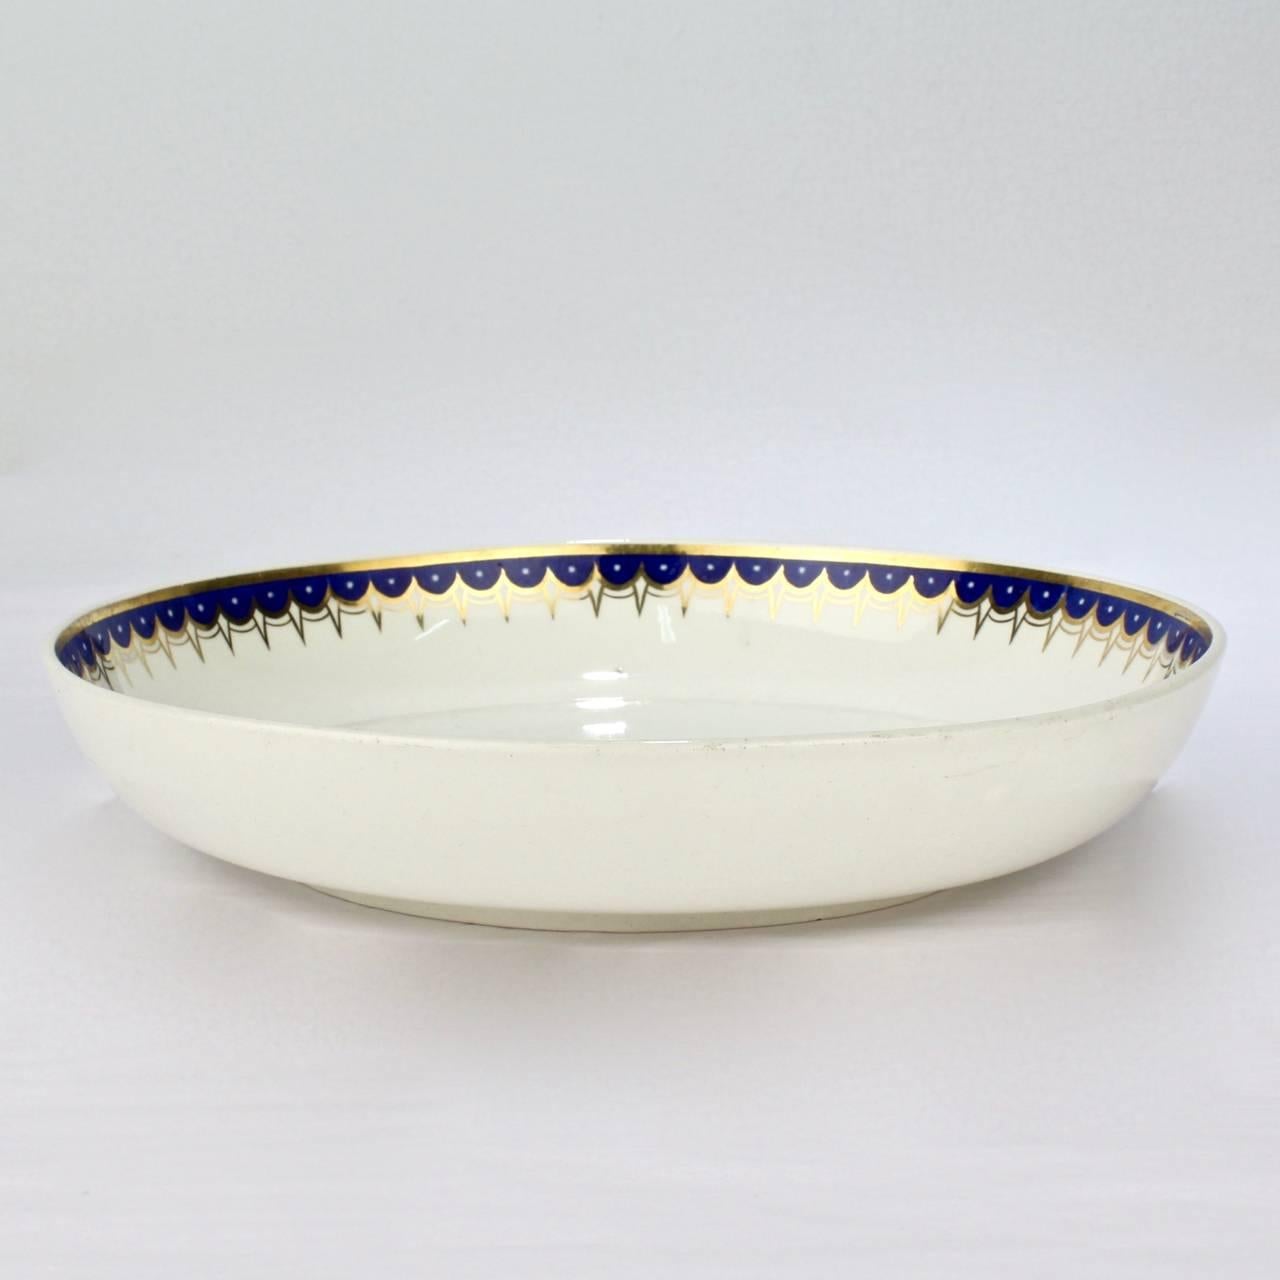 A rare group of wedgwood creamware bowls.

In the neoclassical pattern no. 892 with a cobalt blue and gold border.

Diameters: just under 9 in., just over 8 3/4 in., and just over 7 3/4 in.

The reverse of each bears impressed factory